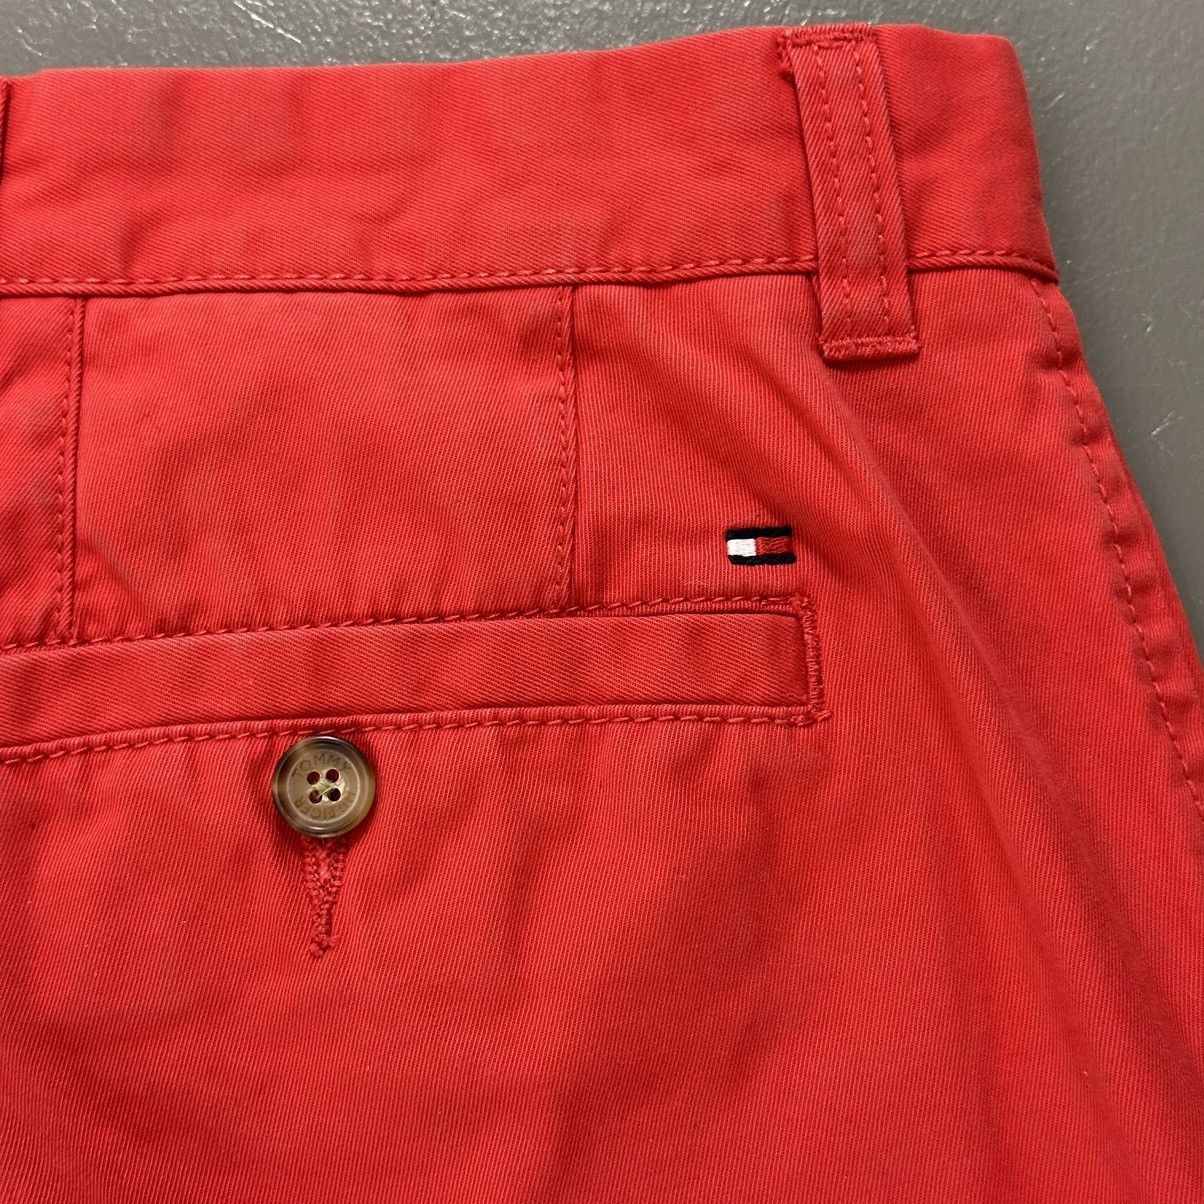 Vintage 2000s Tommy Hilfiger Chino Pants - 6